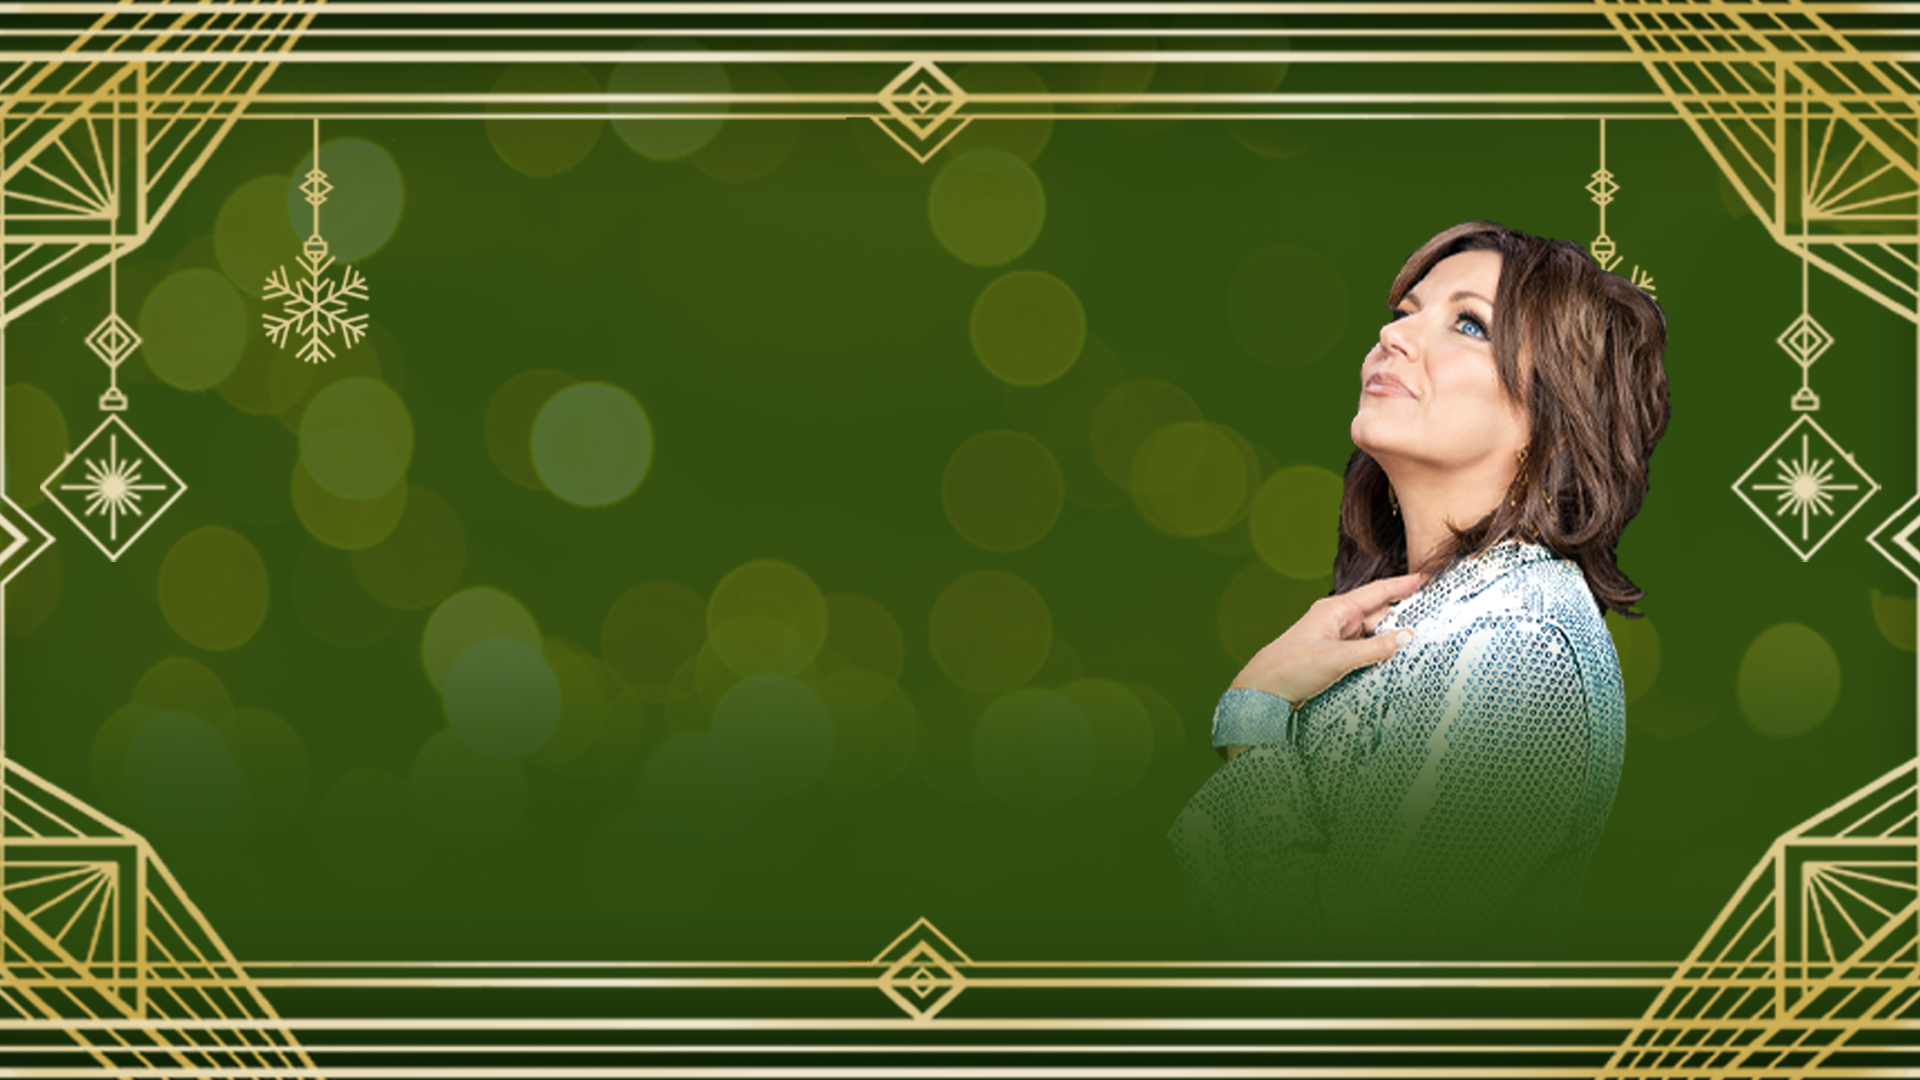 Martina McBride in a blue dress on a green/gold background